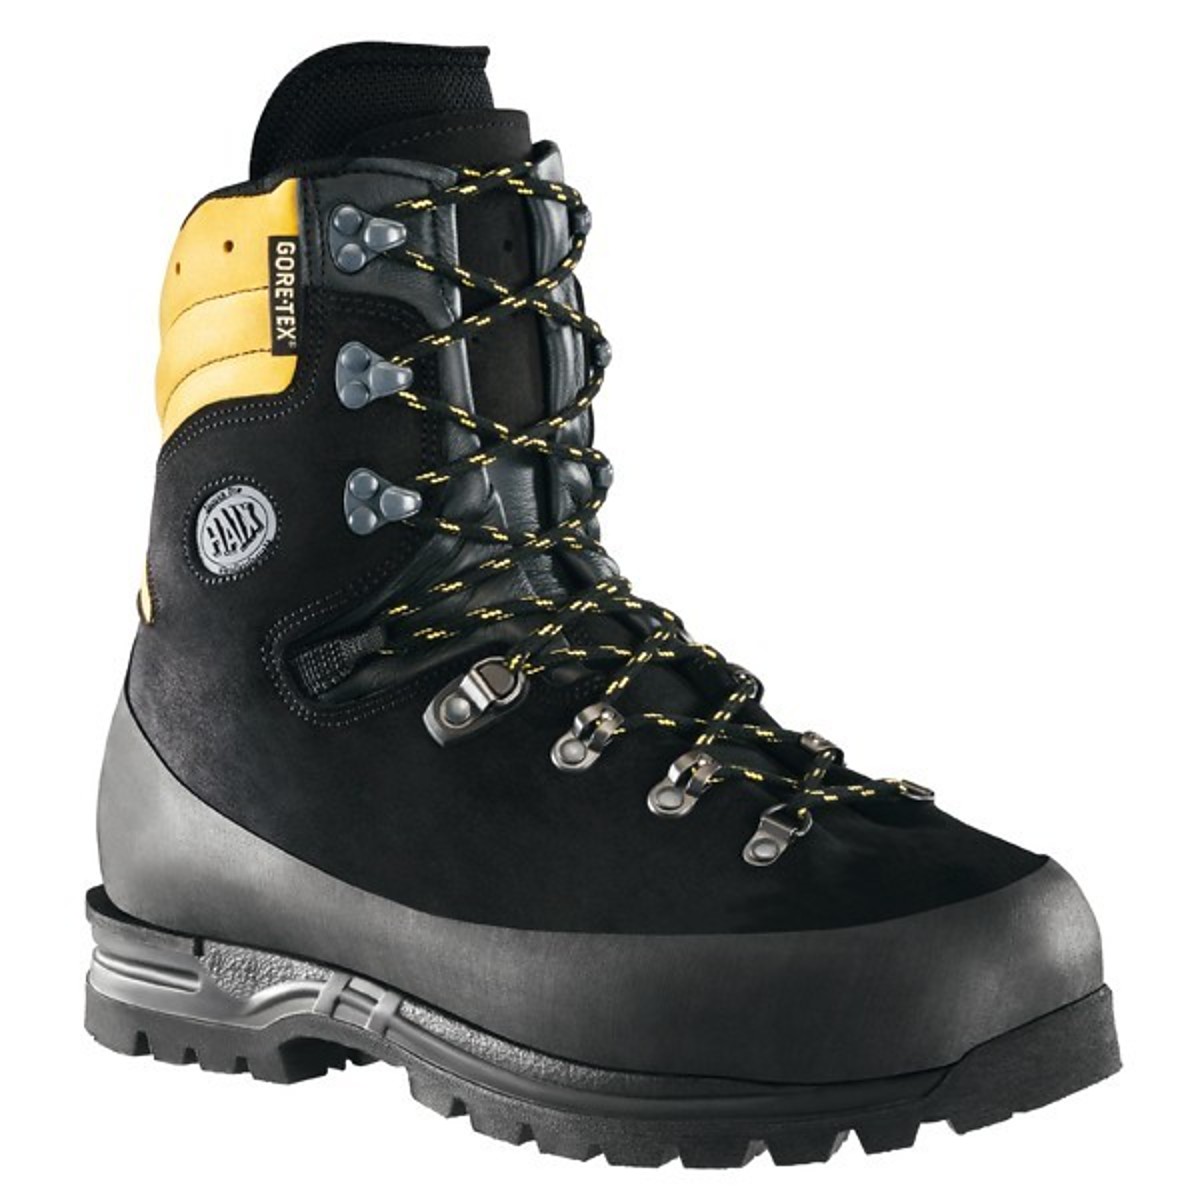 Haix Protector Alpine forest boots